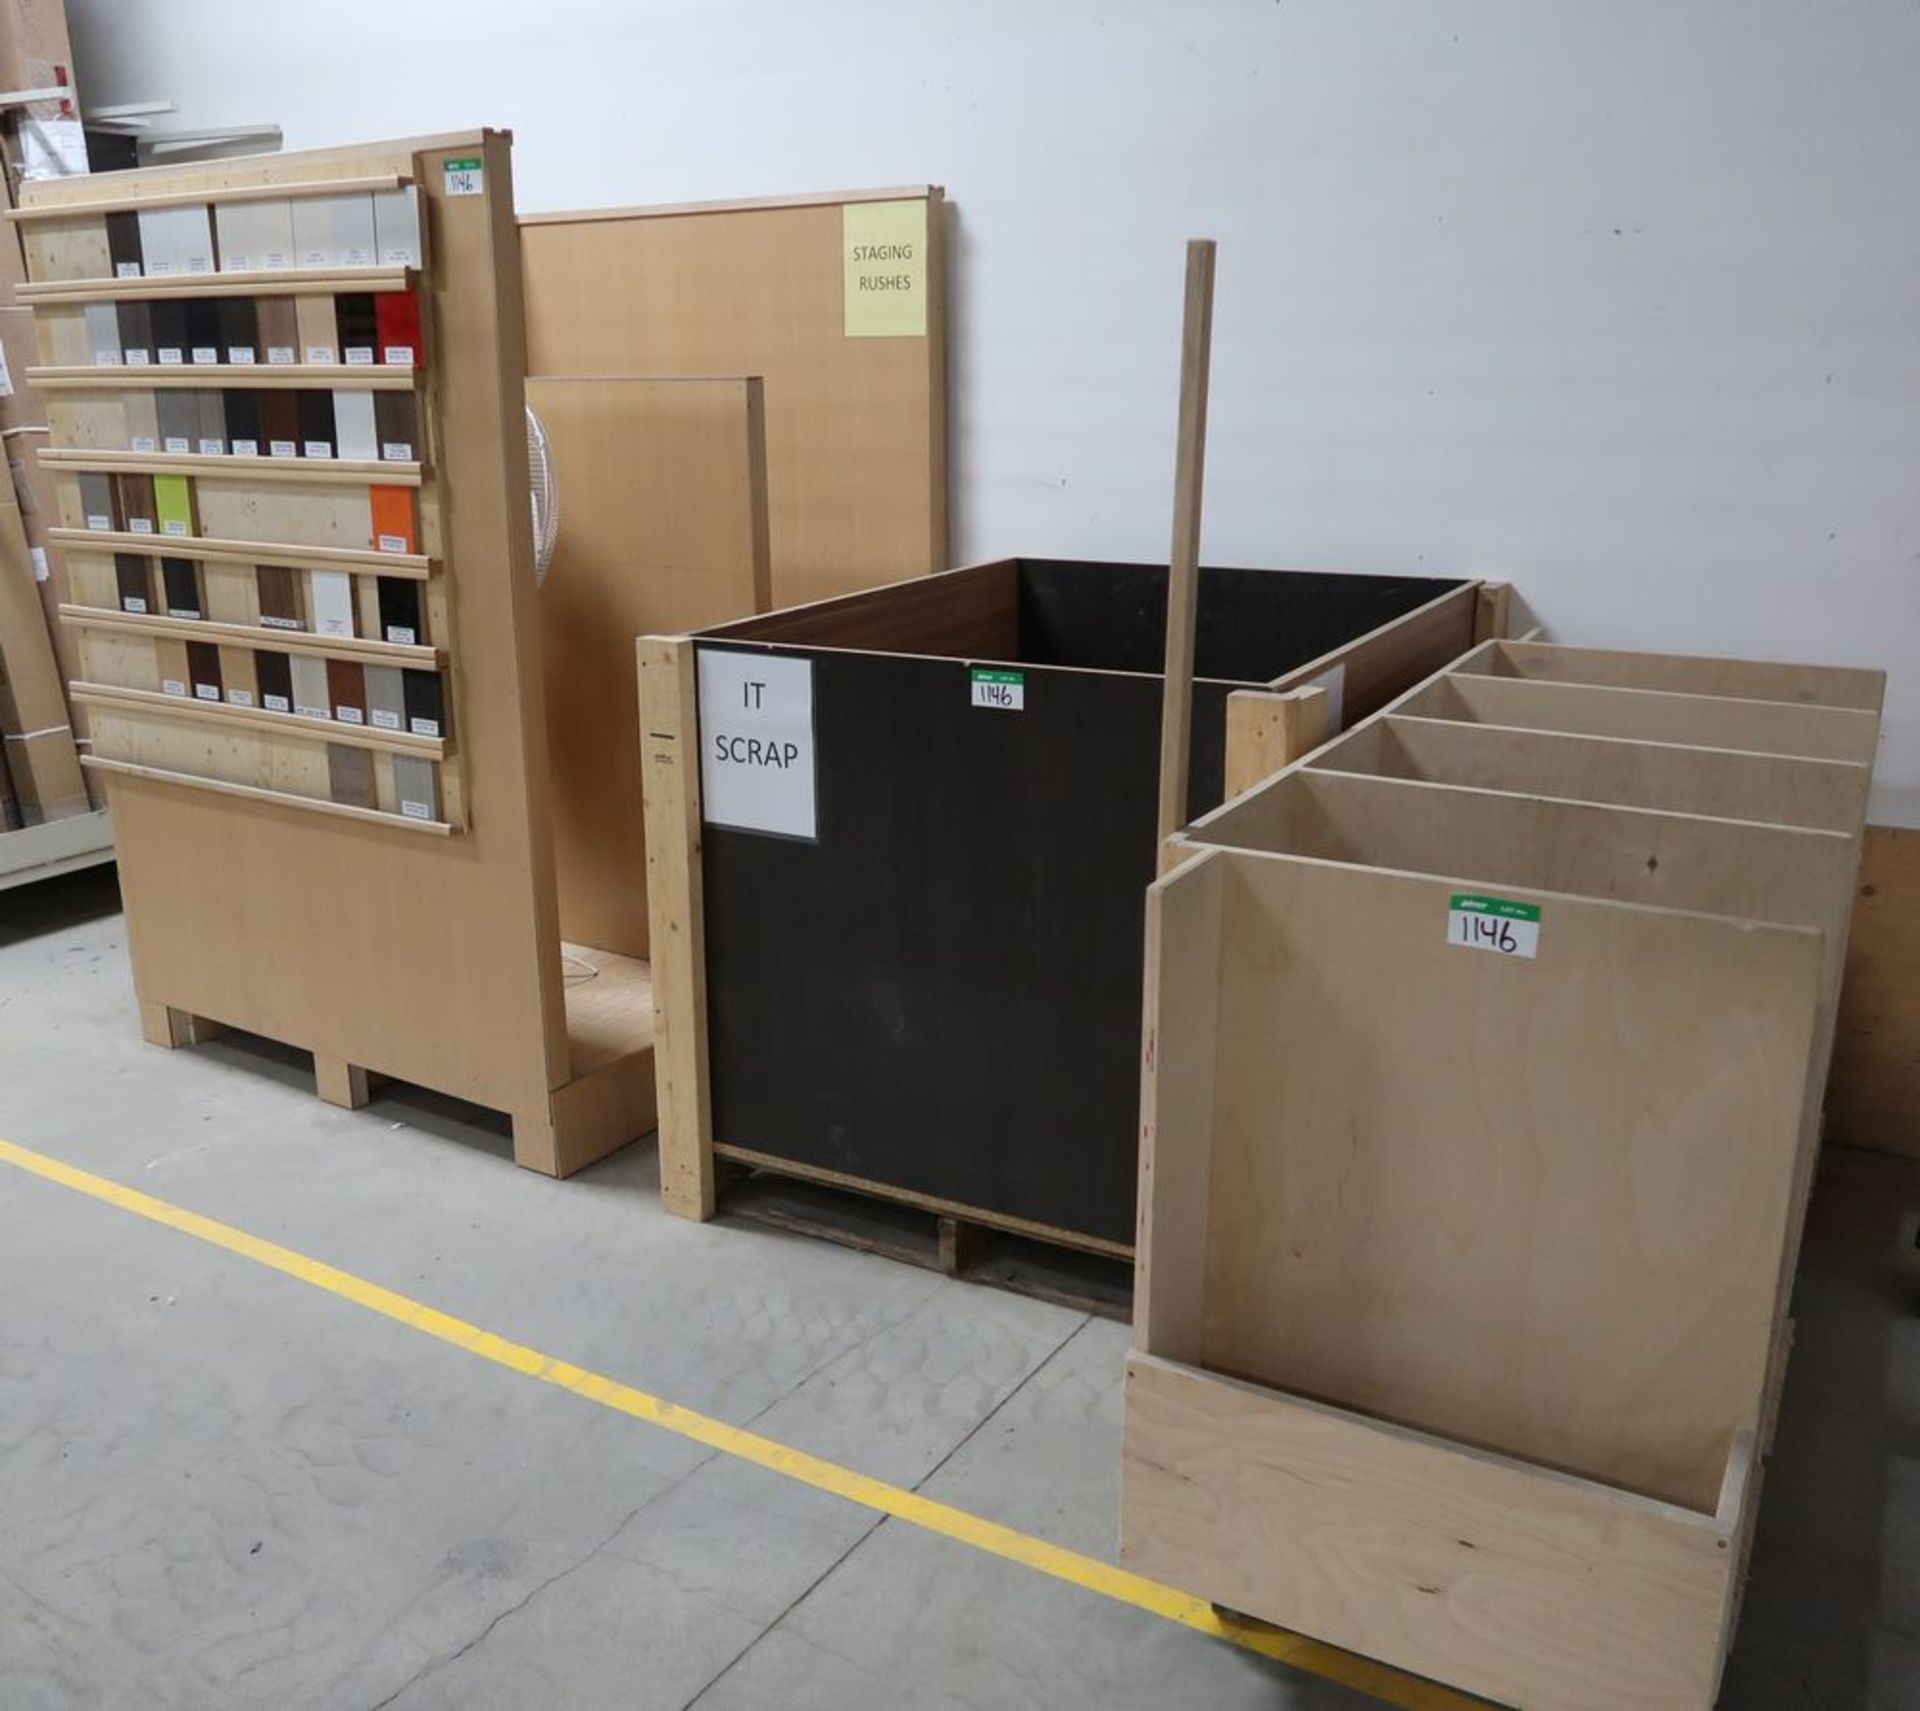 3 WOODEN MATERIAL STORAGE UNITS